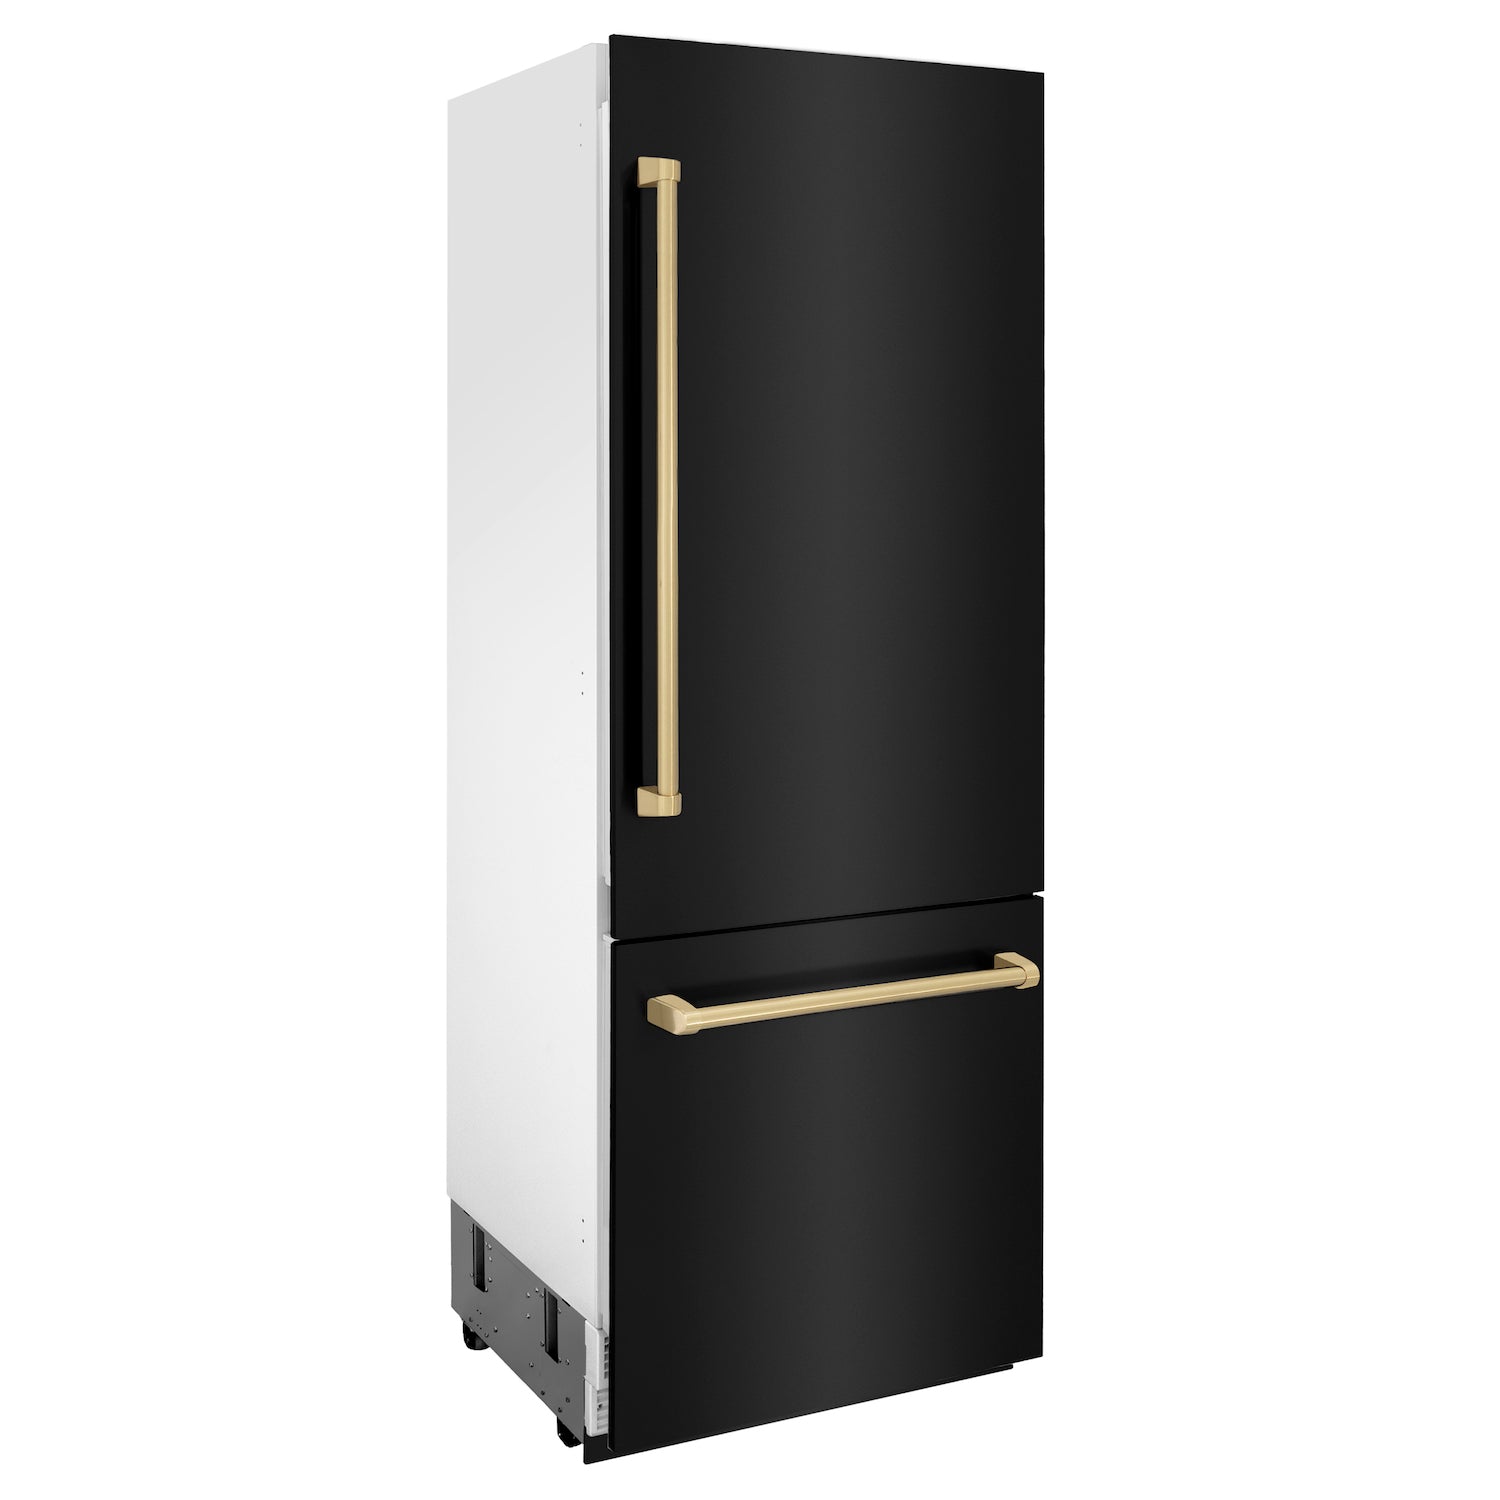 ZLINE 30" Autograph Edition Built-in Refrigerator in Black Stainless Steel with Champagne Bronze Accents side.